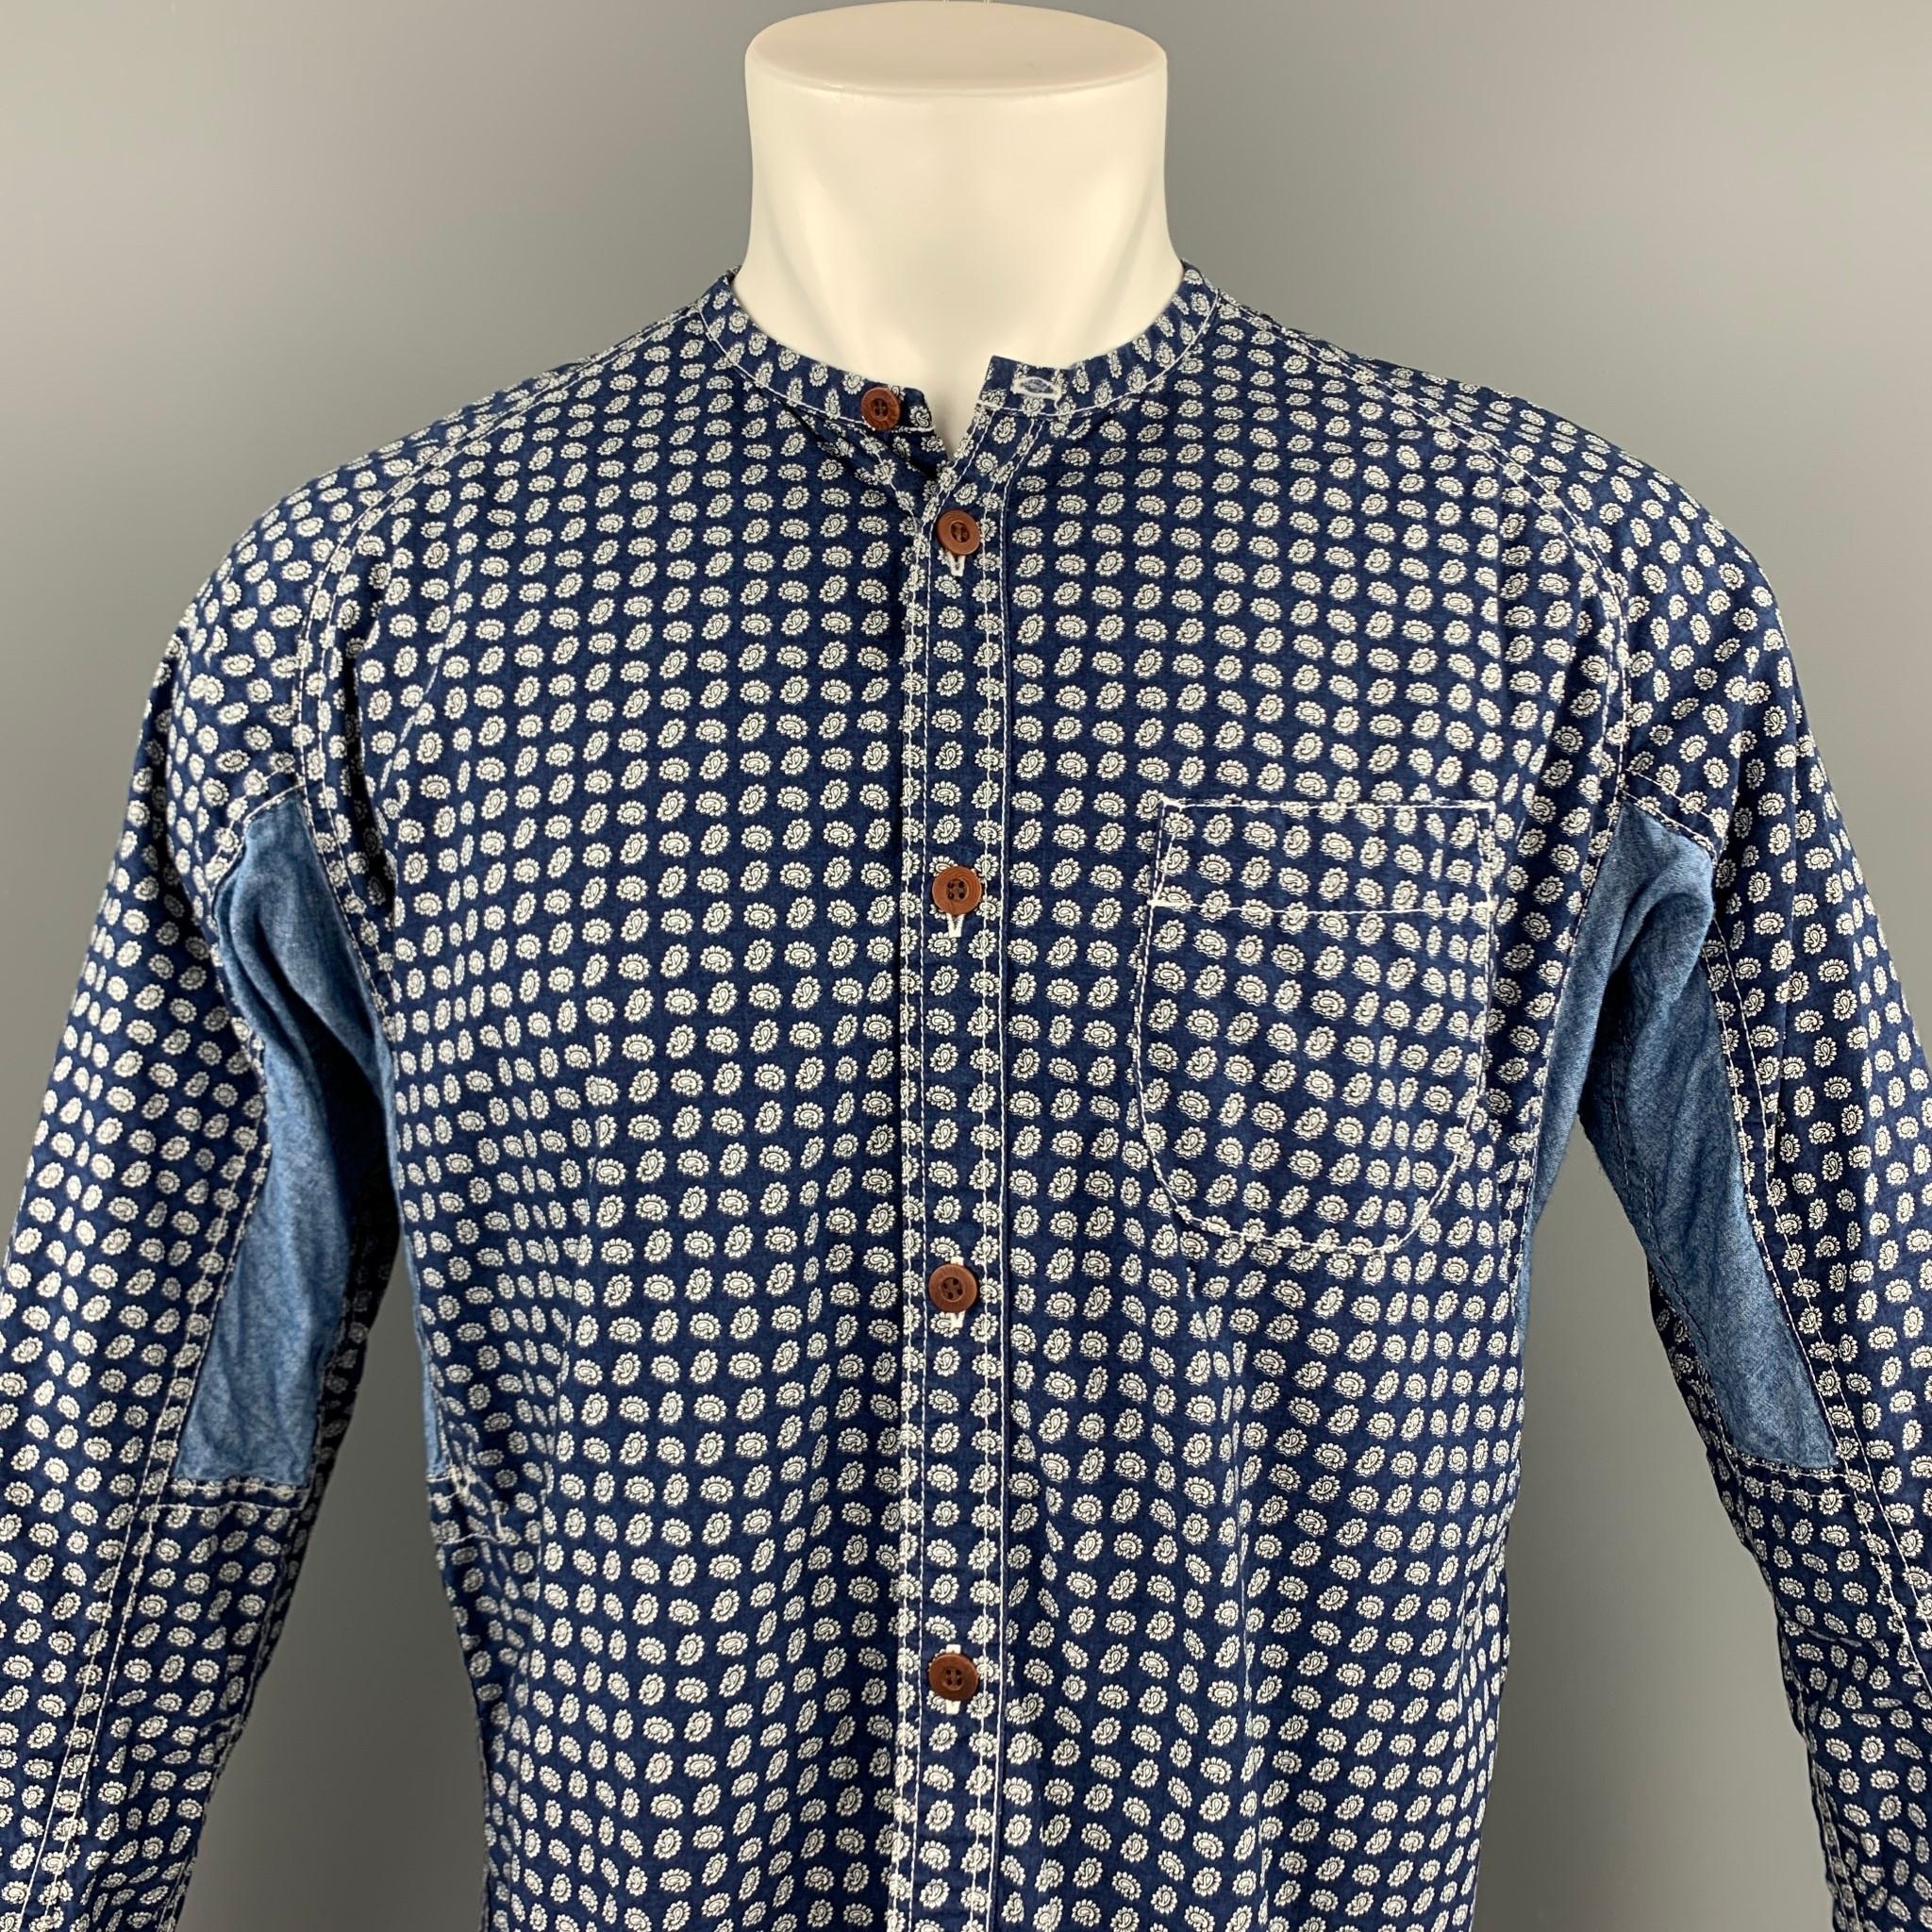 JUNYA WATANABE long sleeve shirt comes in a indigo print cotton featuring a button up style, front pocket, and a nehru collar. Made in Japan.

Very Good Pre-Owned Condition.
Marked: M / AD 2014

Measurements:

Shoulder: 17 in. 
Chest: 44 in.
Sleeve: